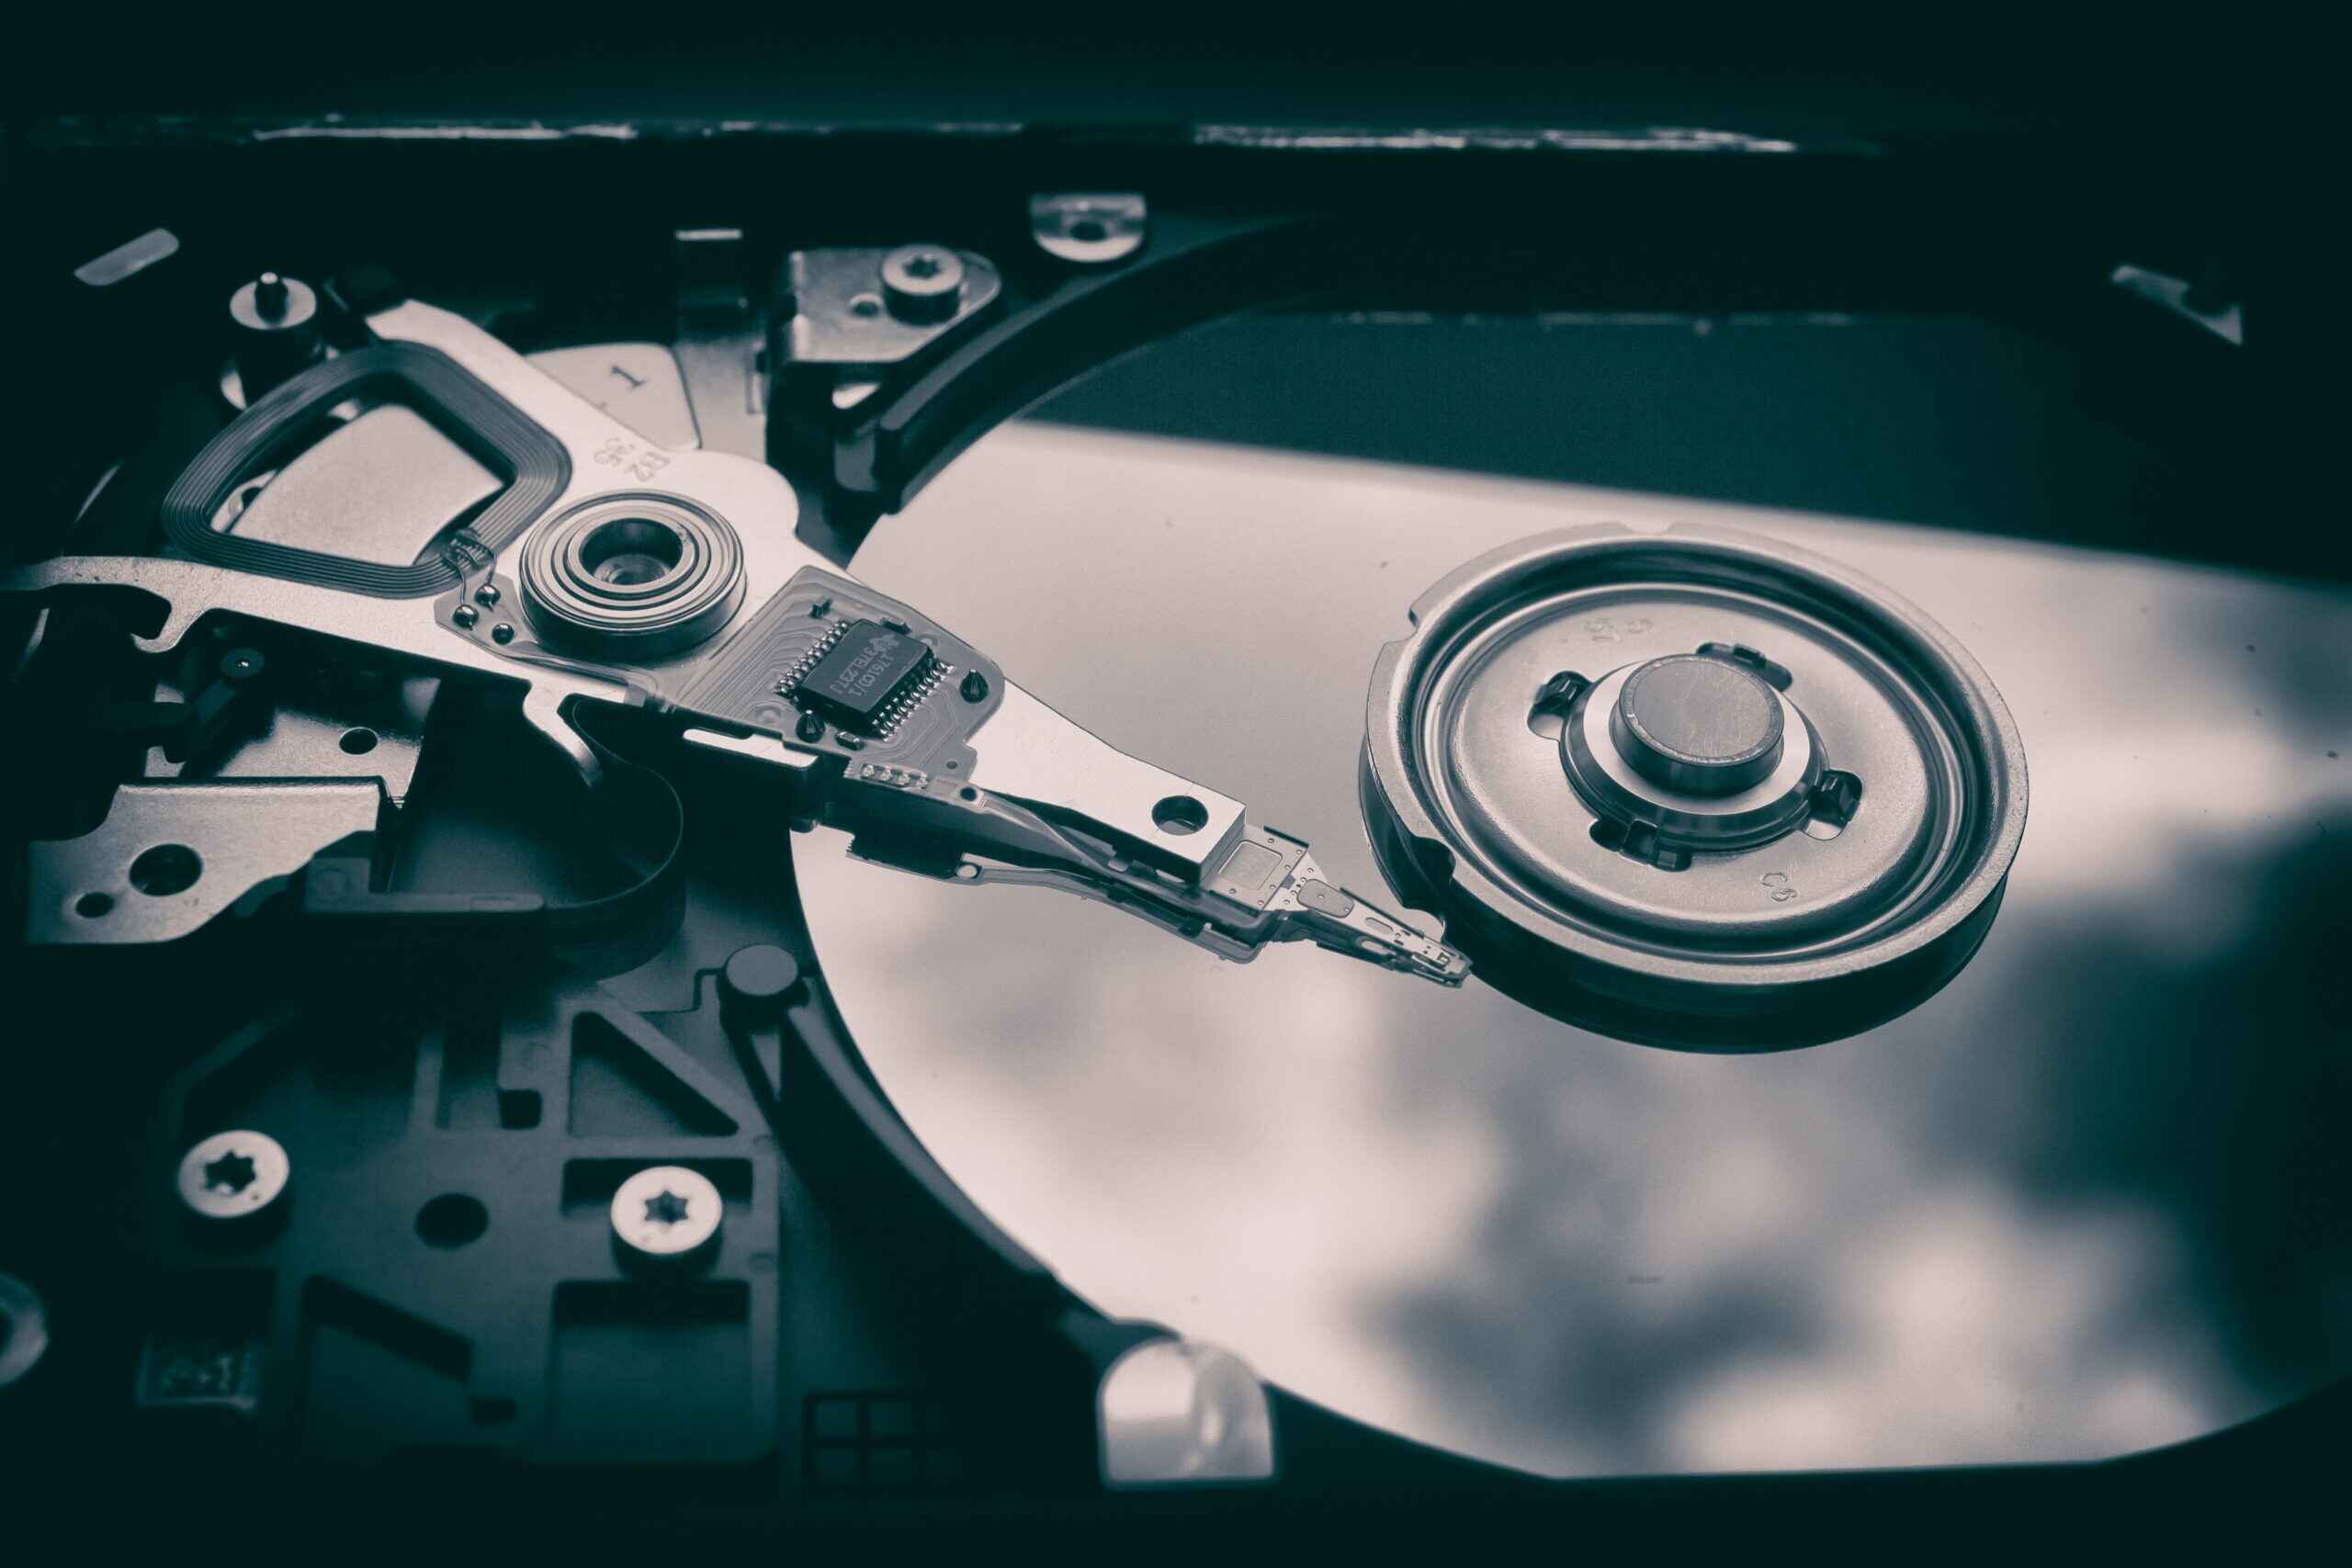 What Is The Smallest Unit Of Data Transfer In A Physical Hard Disk Drive